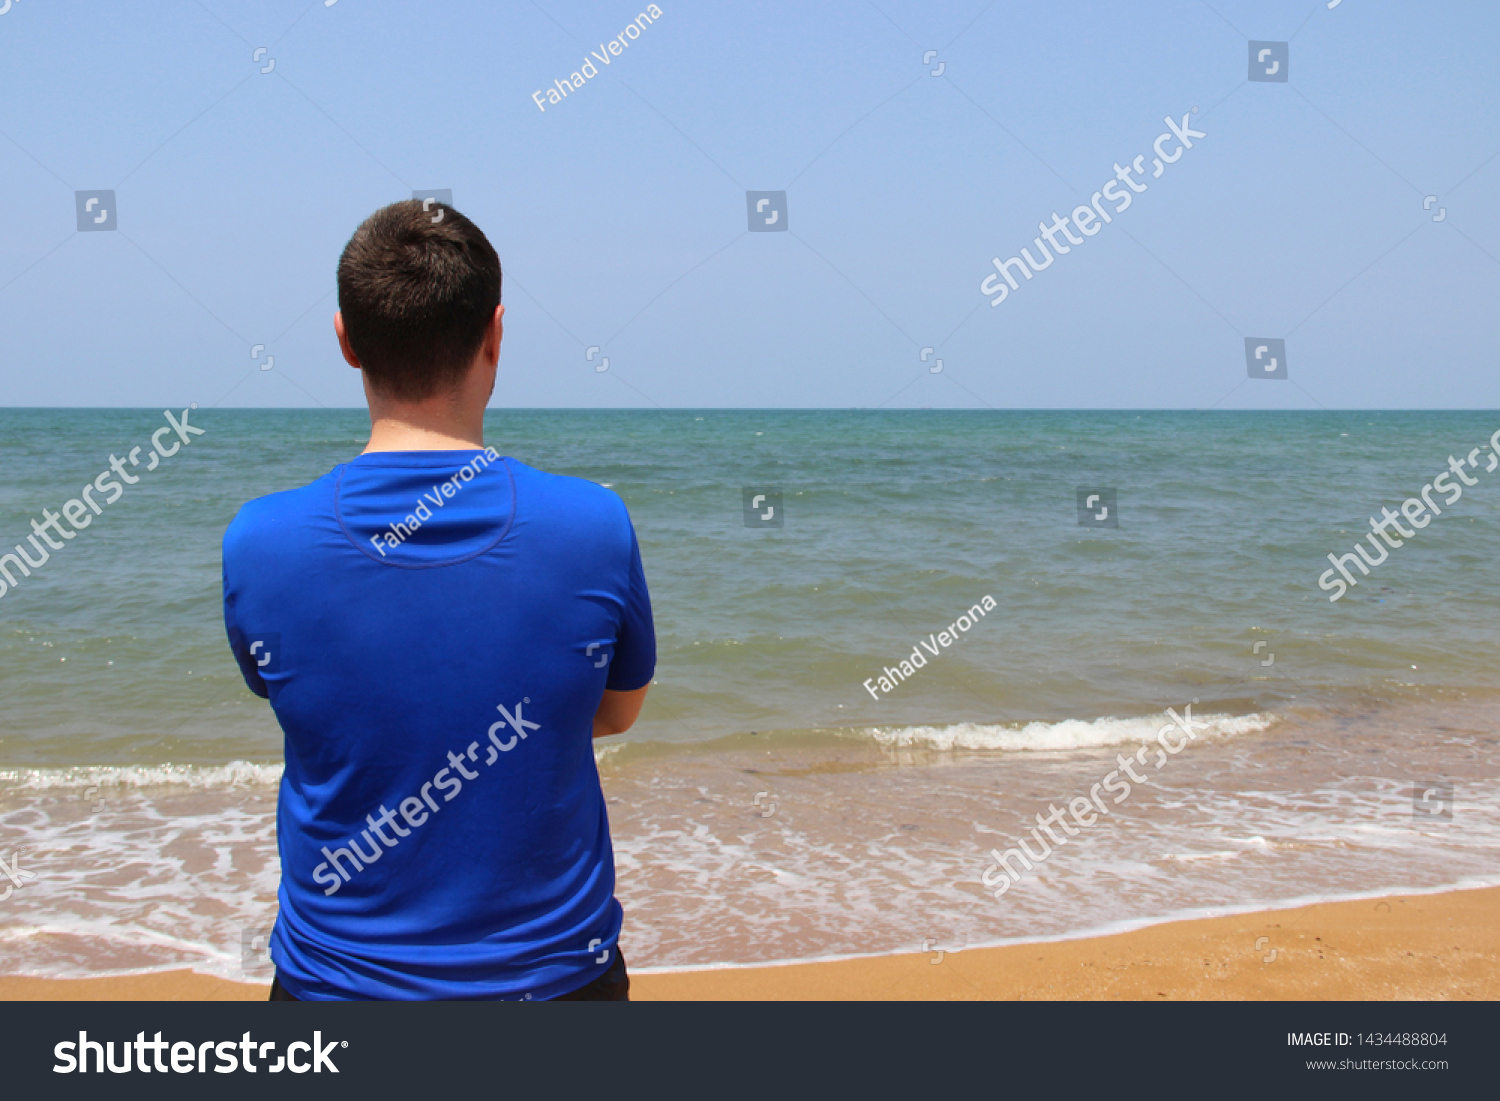 a man stands with his back in a blue t-shirt for swimming against the background of the sea and sand. sunny summer day. the man has dark hair #1434488804